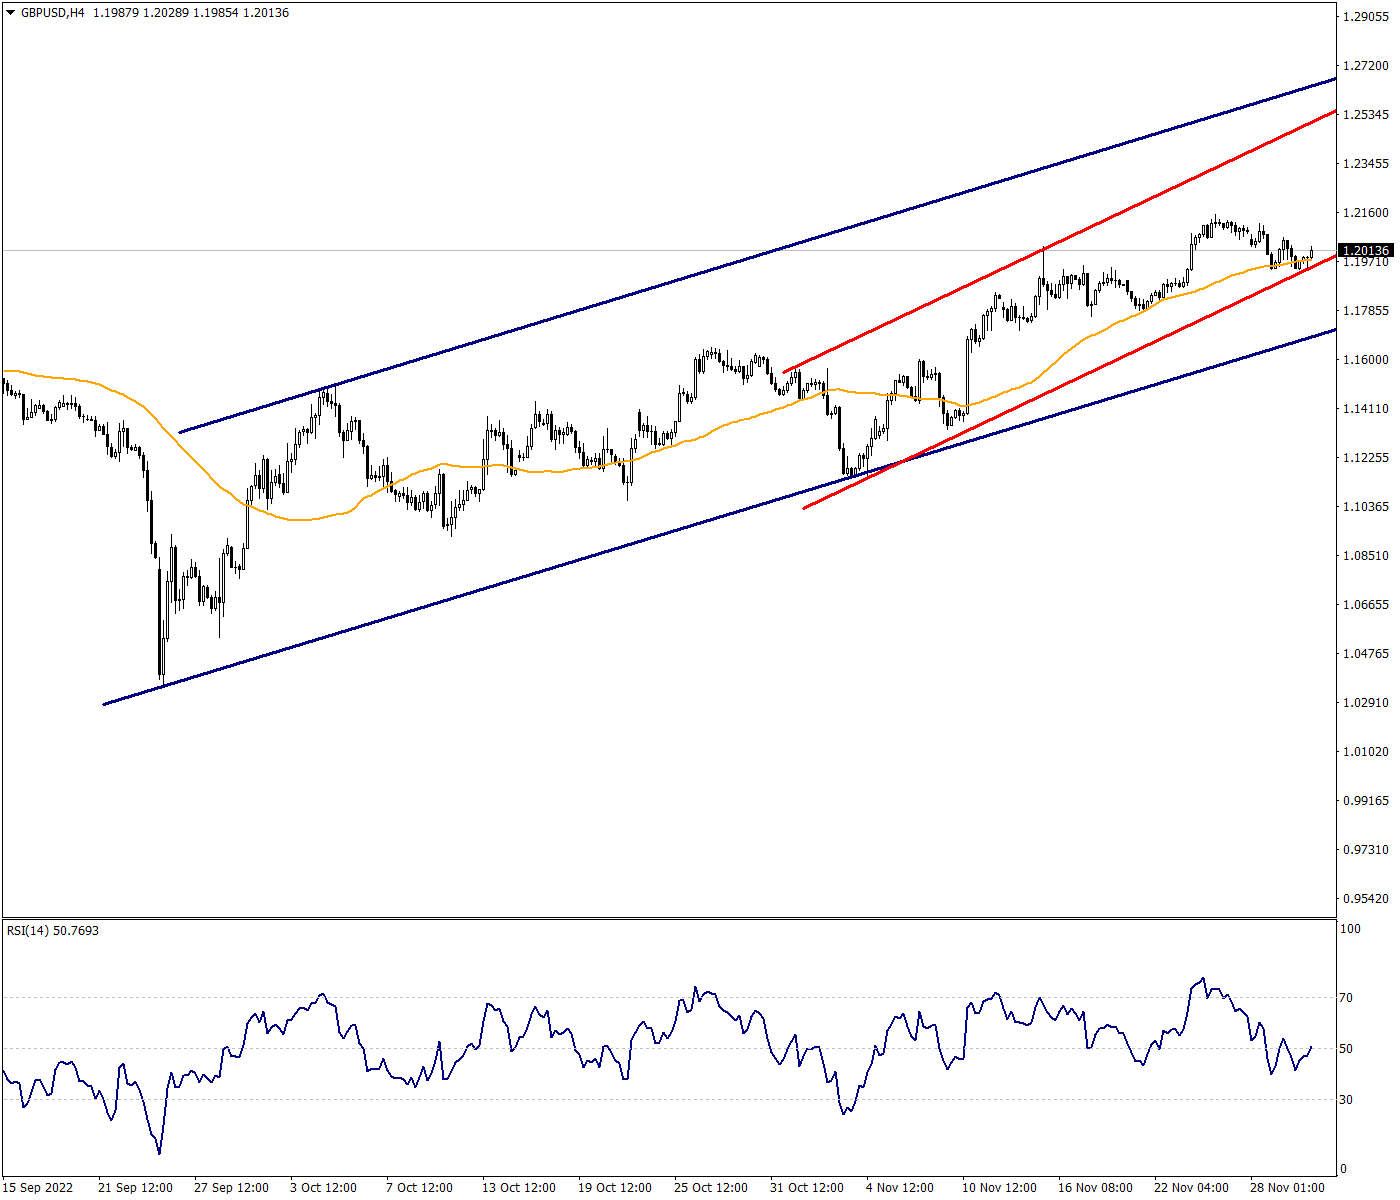 GBPUSD Continues to Defend Ascending Channel